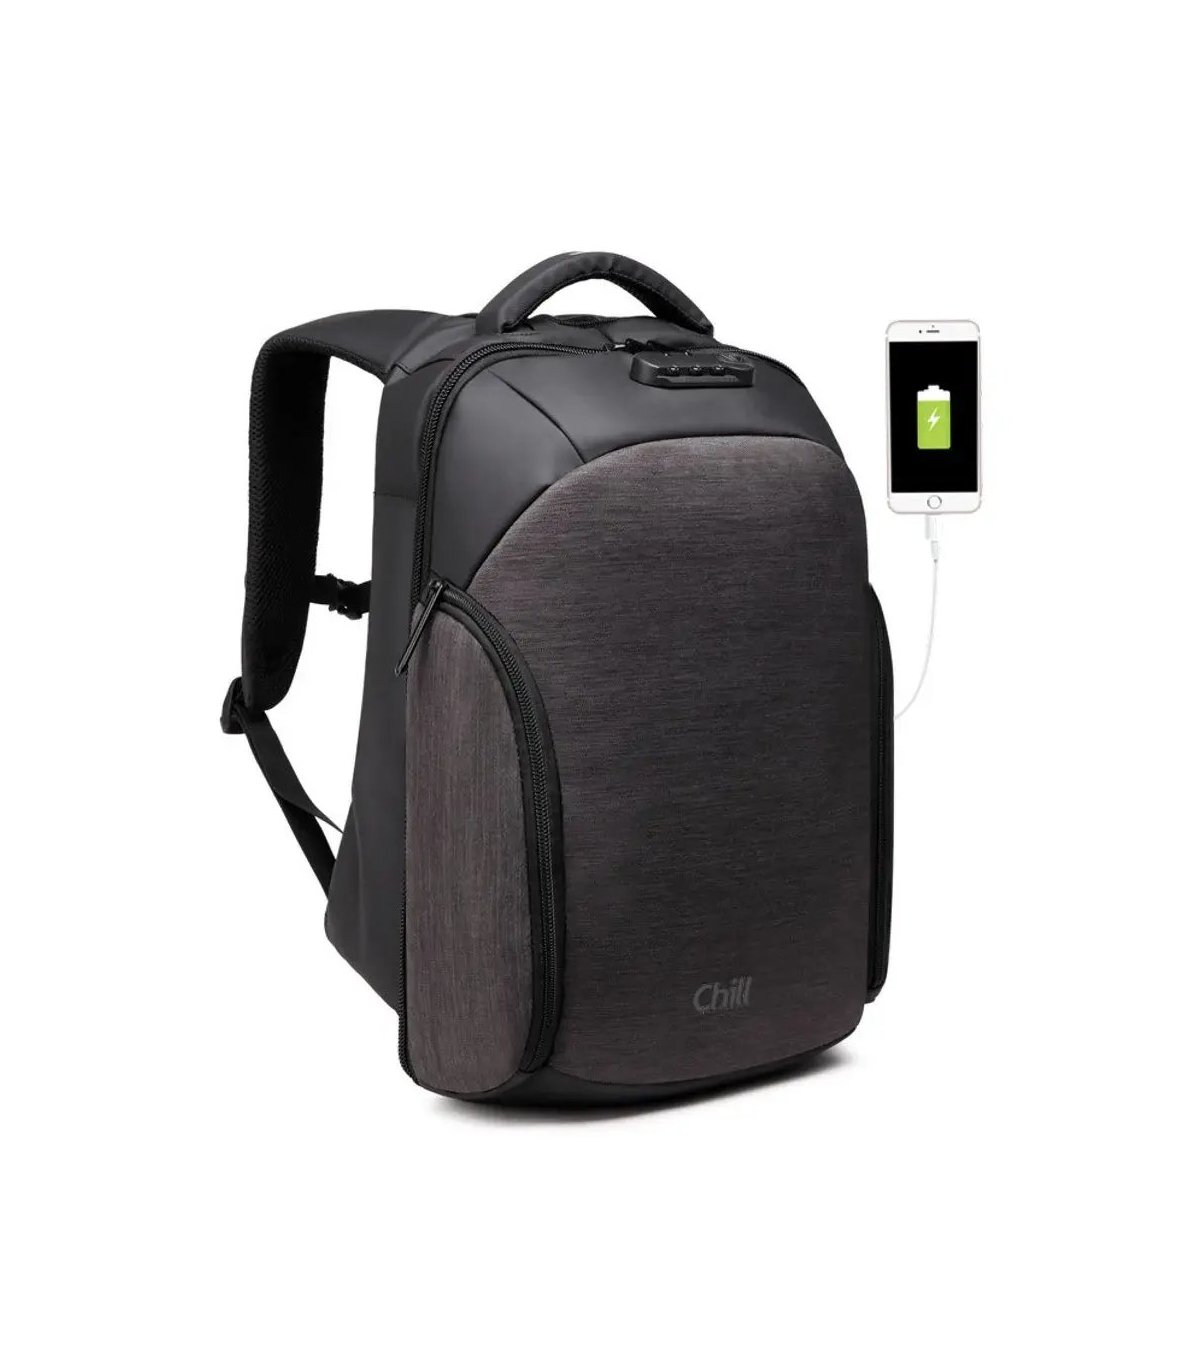 Chill Stealth Anti-Theft Backpack. Code Lock, Water Repellent & Thermo